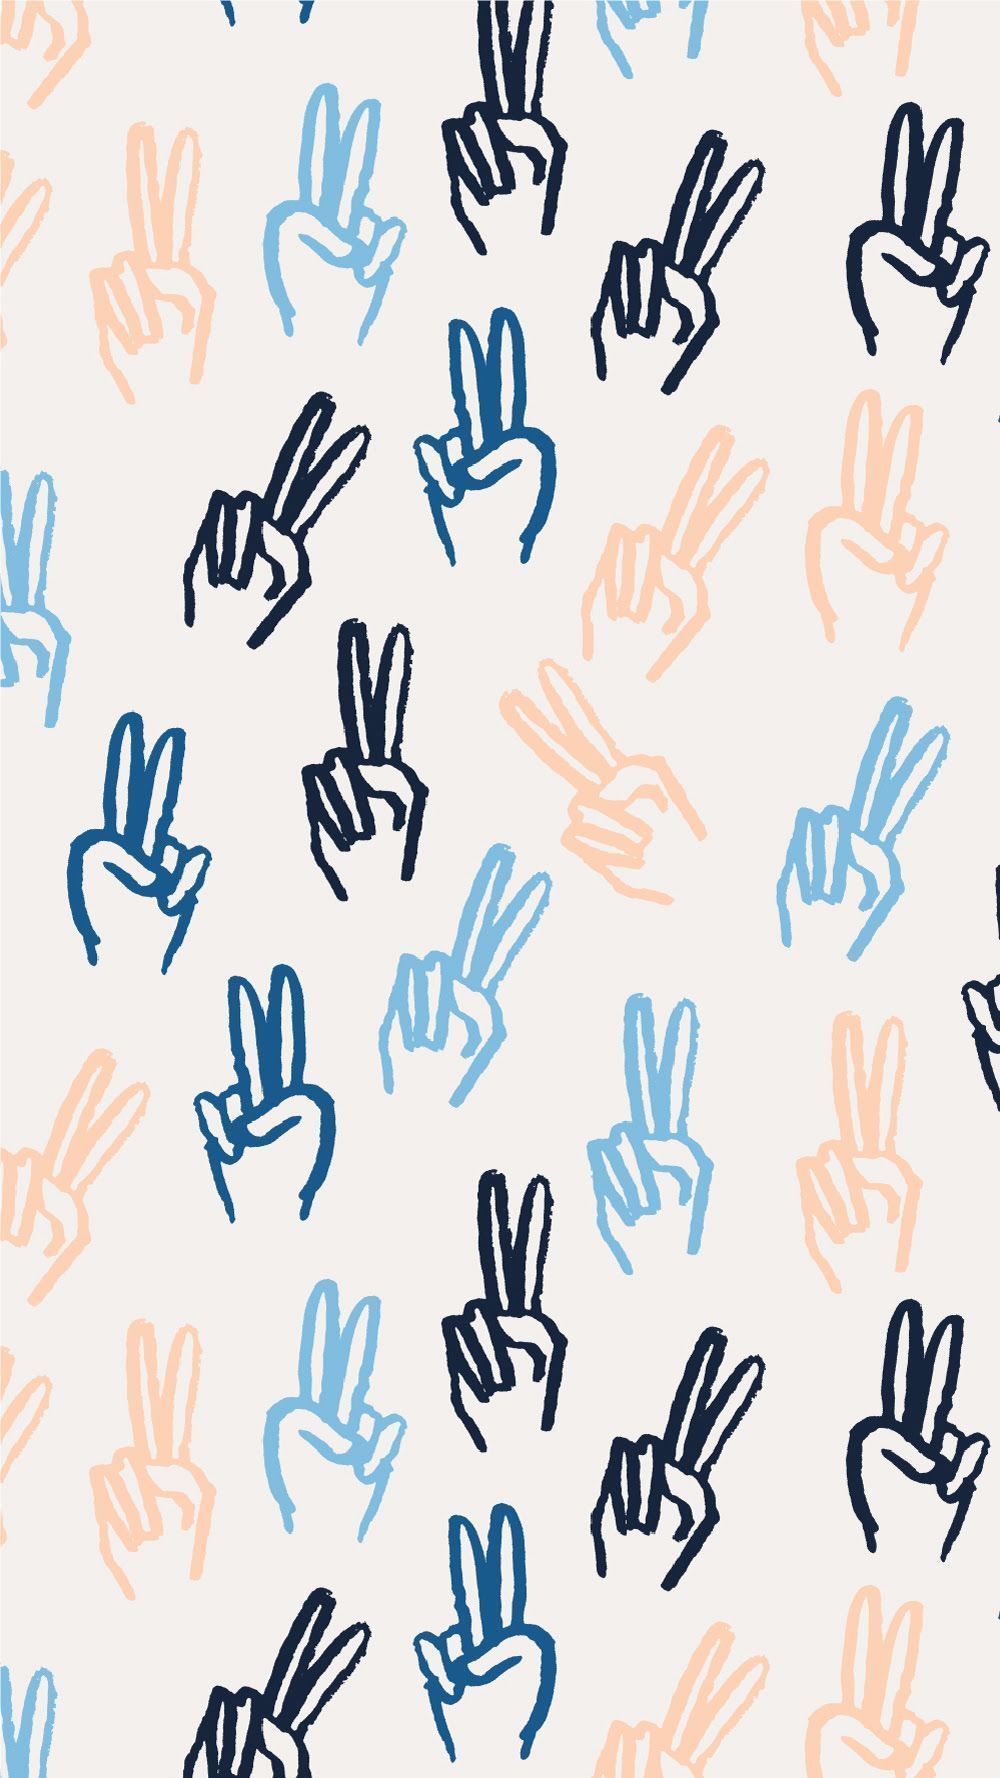 Peace Girl Print. Free iphone wallpaper, Picture collage wall, iPhone background wallpaper